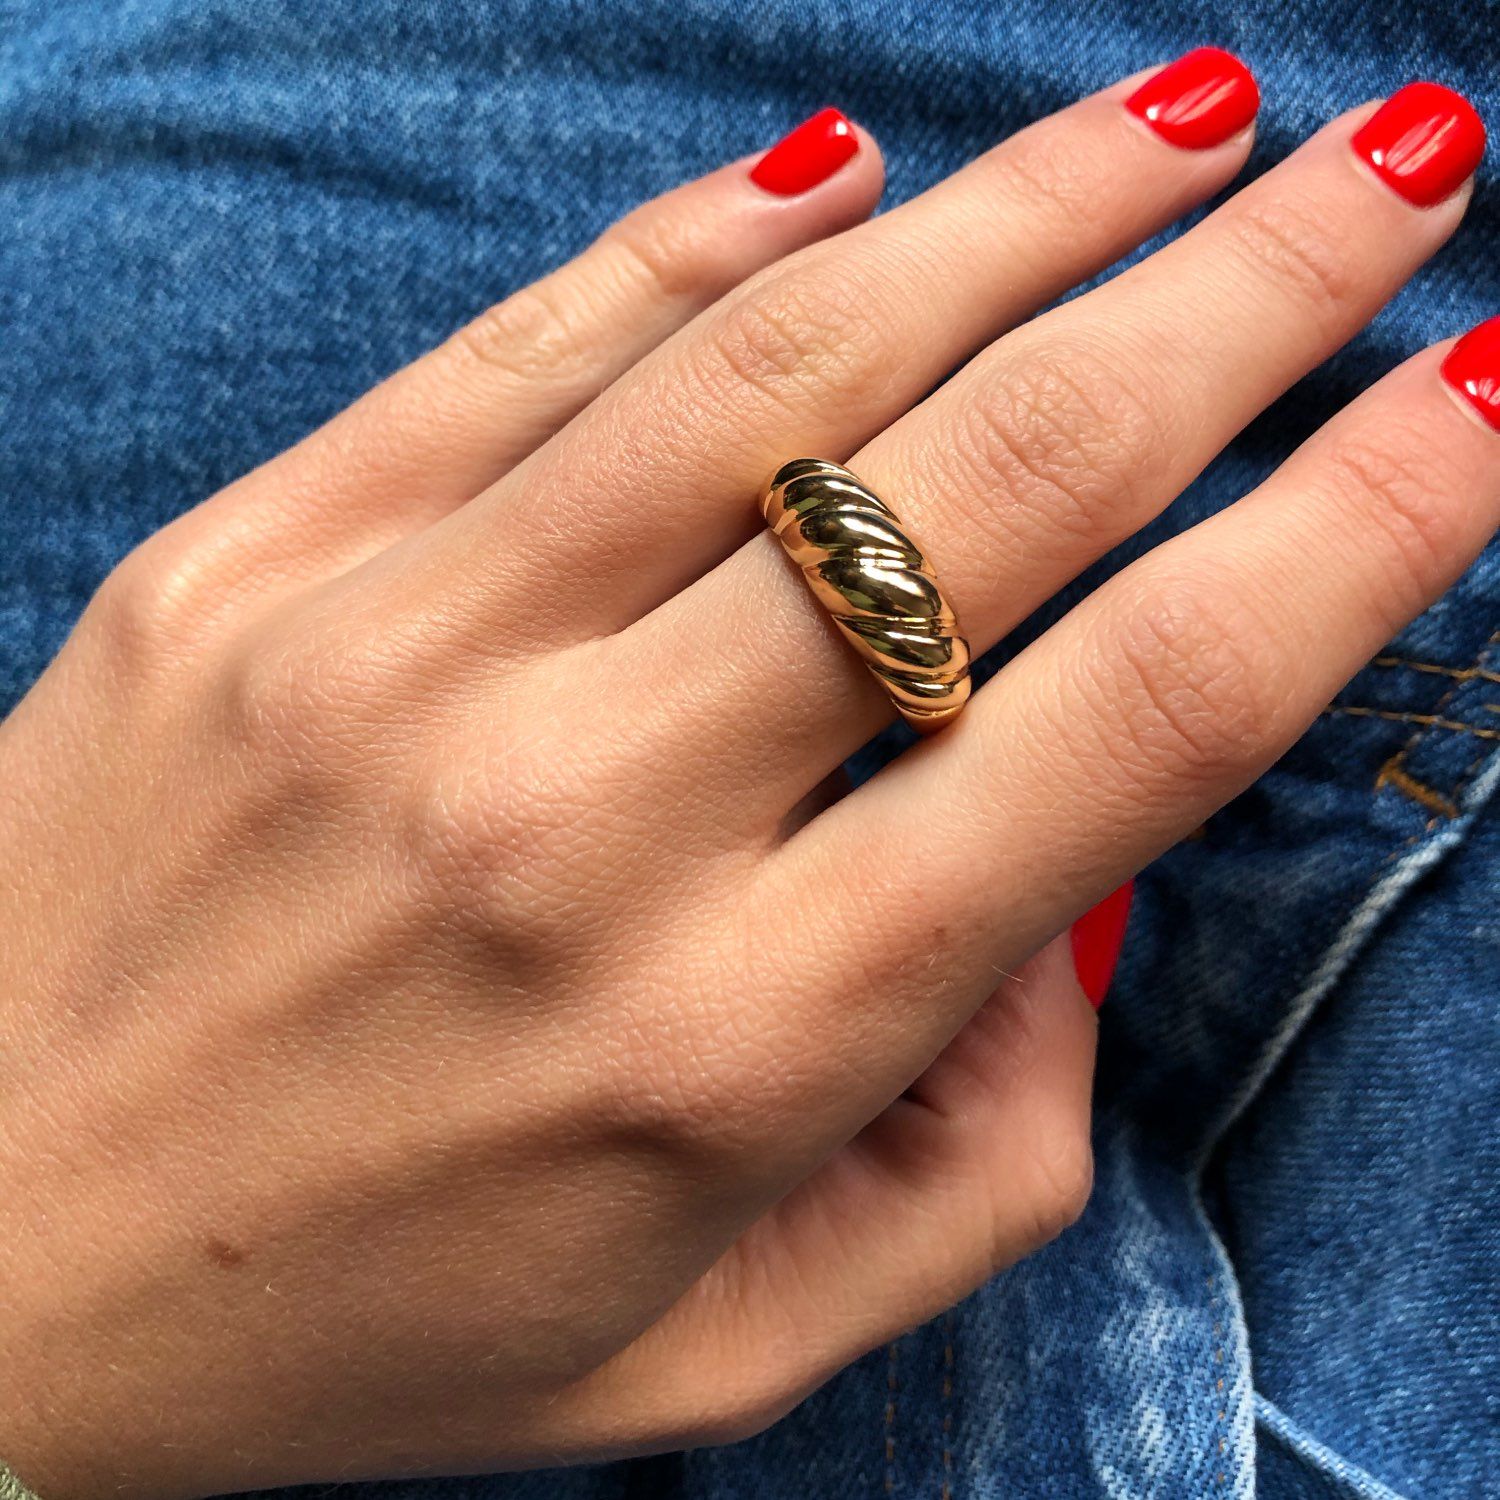 shop with crypto buy Croissant Rings for Women Braided Twisted Signet Chunky Dome Ring Stacking Band Jewelry Statement Ring Party Accessories pay with bitcoin